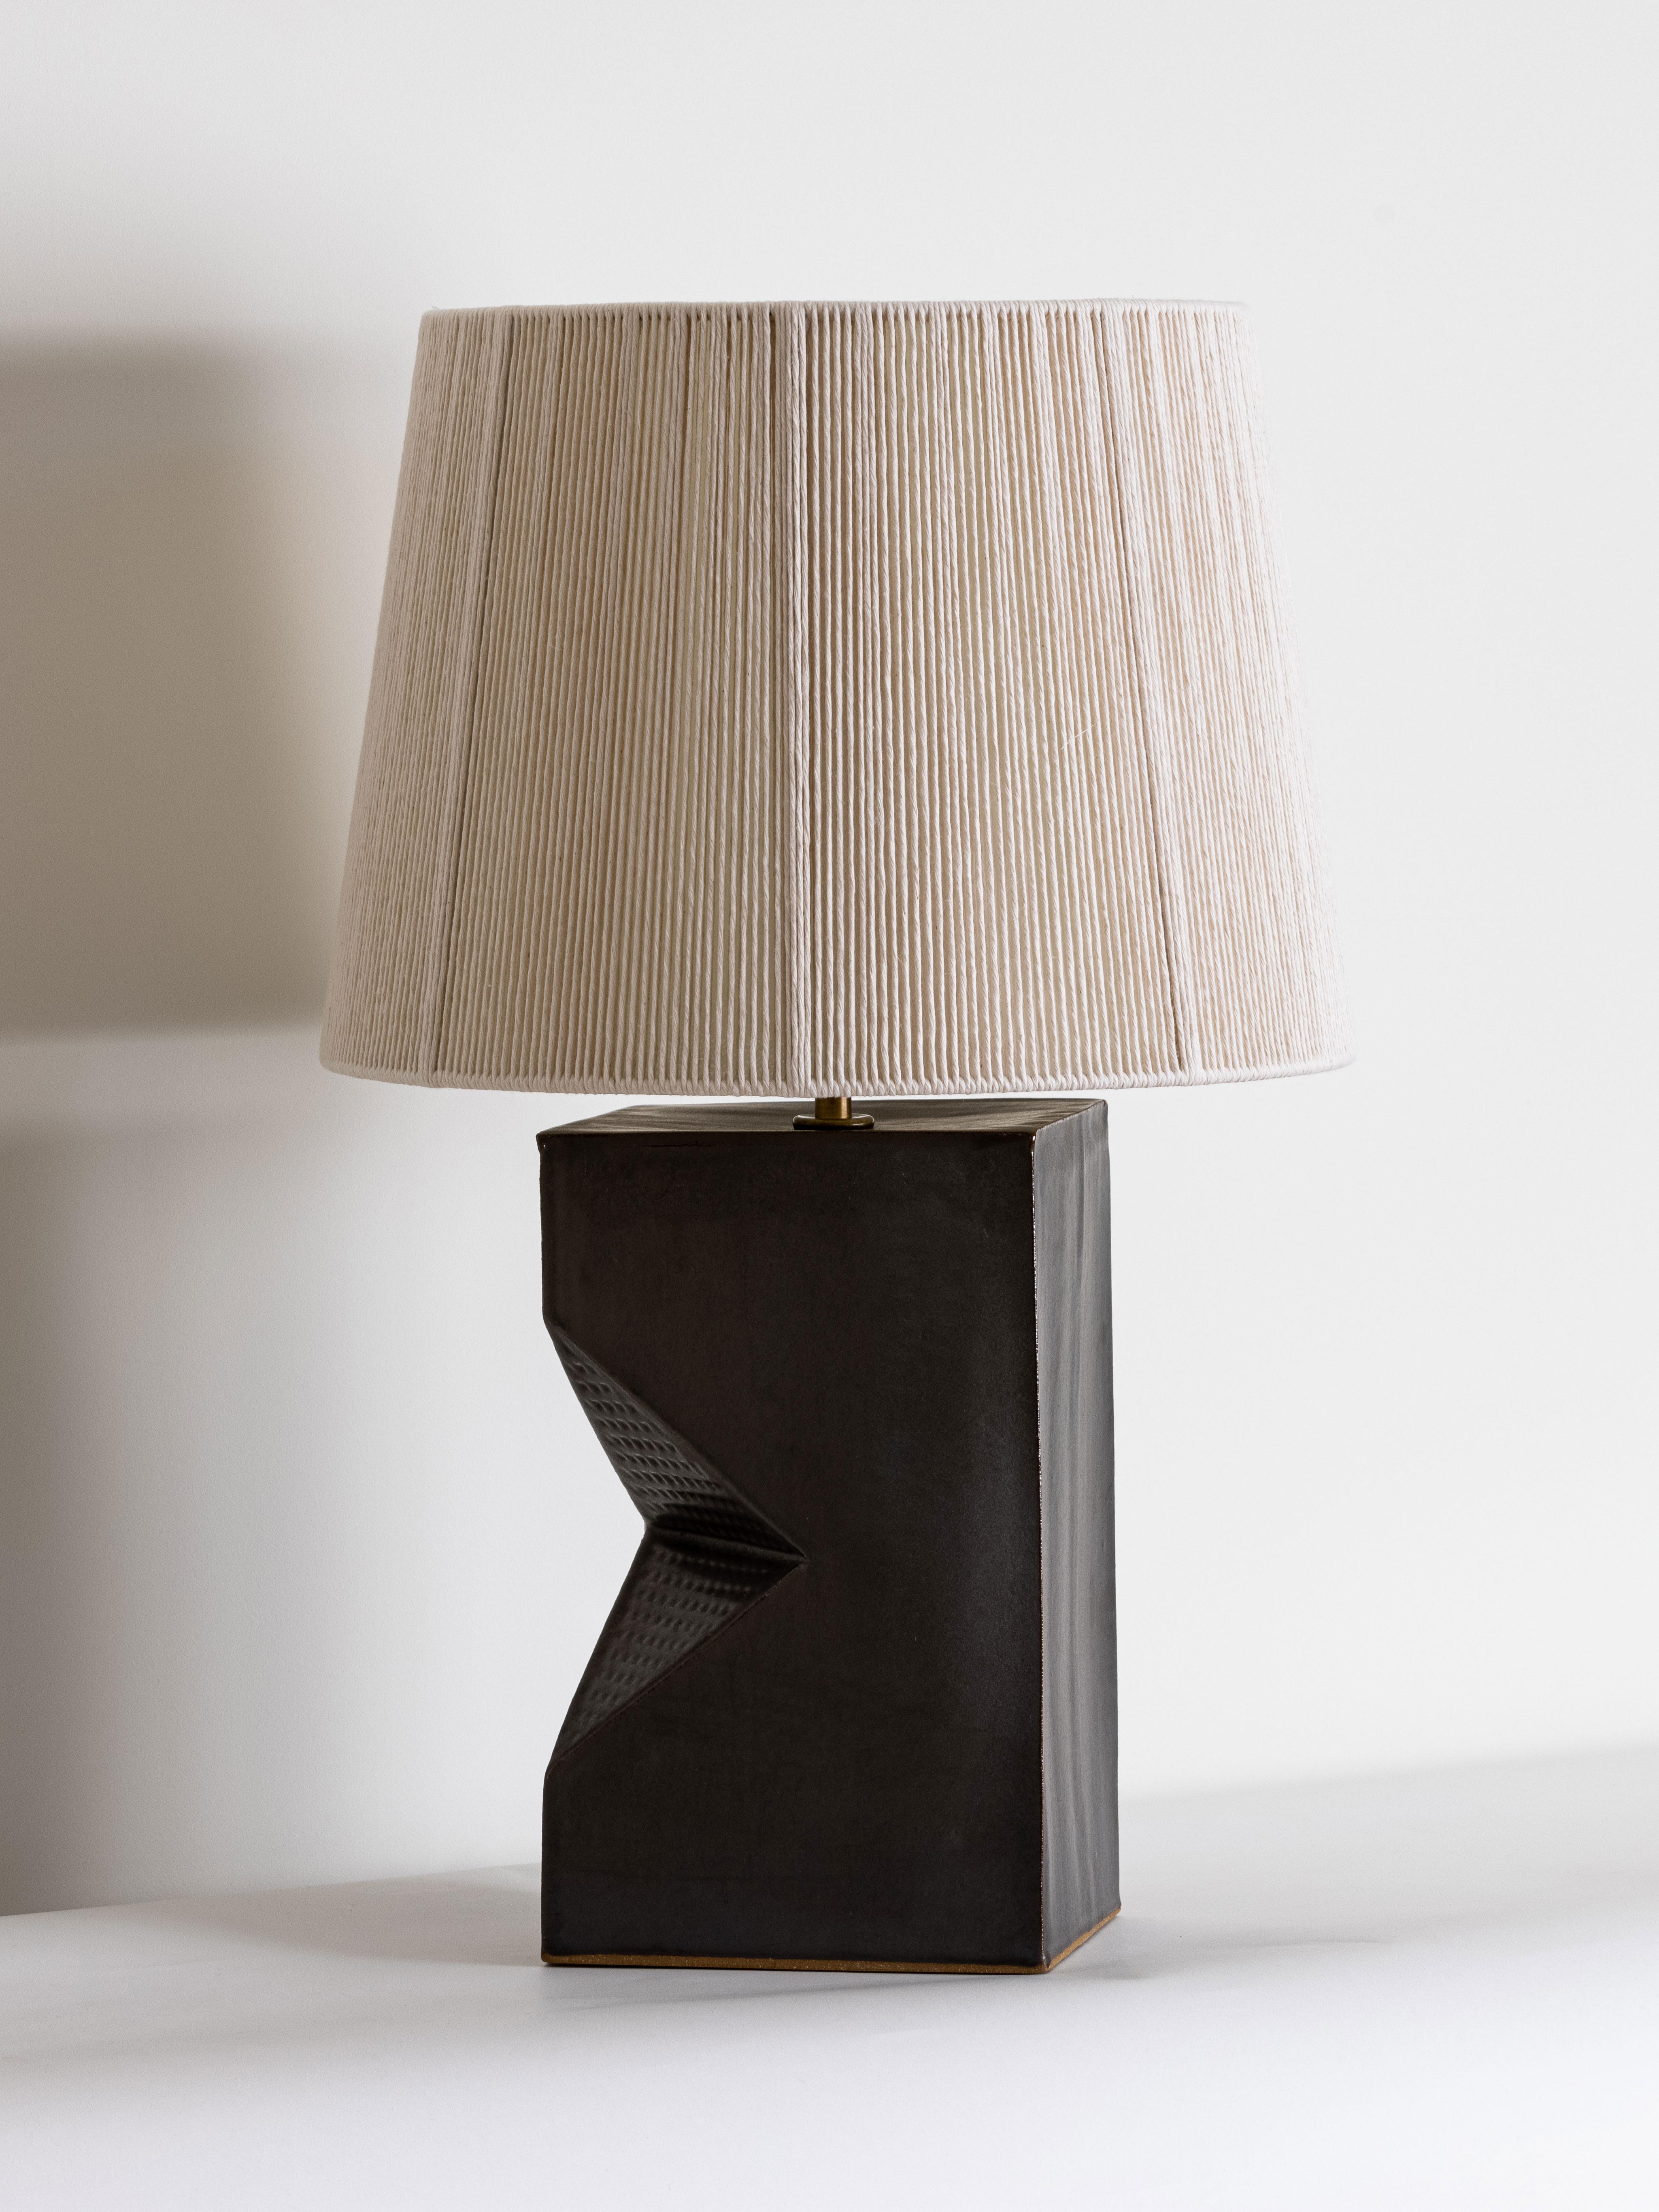 Our stoneware Gem Lamp is
handcrafted using slab-construction
techniques. The lamp’s pattern is created by rolling the surface with textured rolling pins and rods.

FINISH

- Dipped glaze, pictured in walnut 
- Antique brass fittings
-